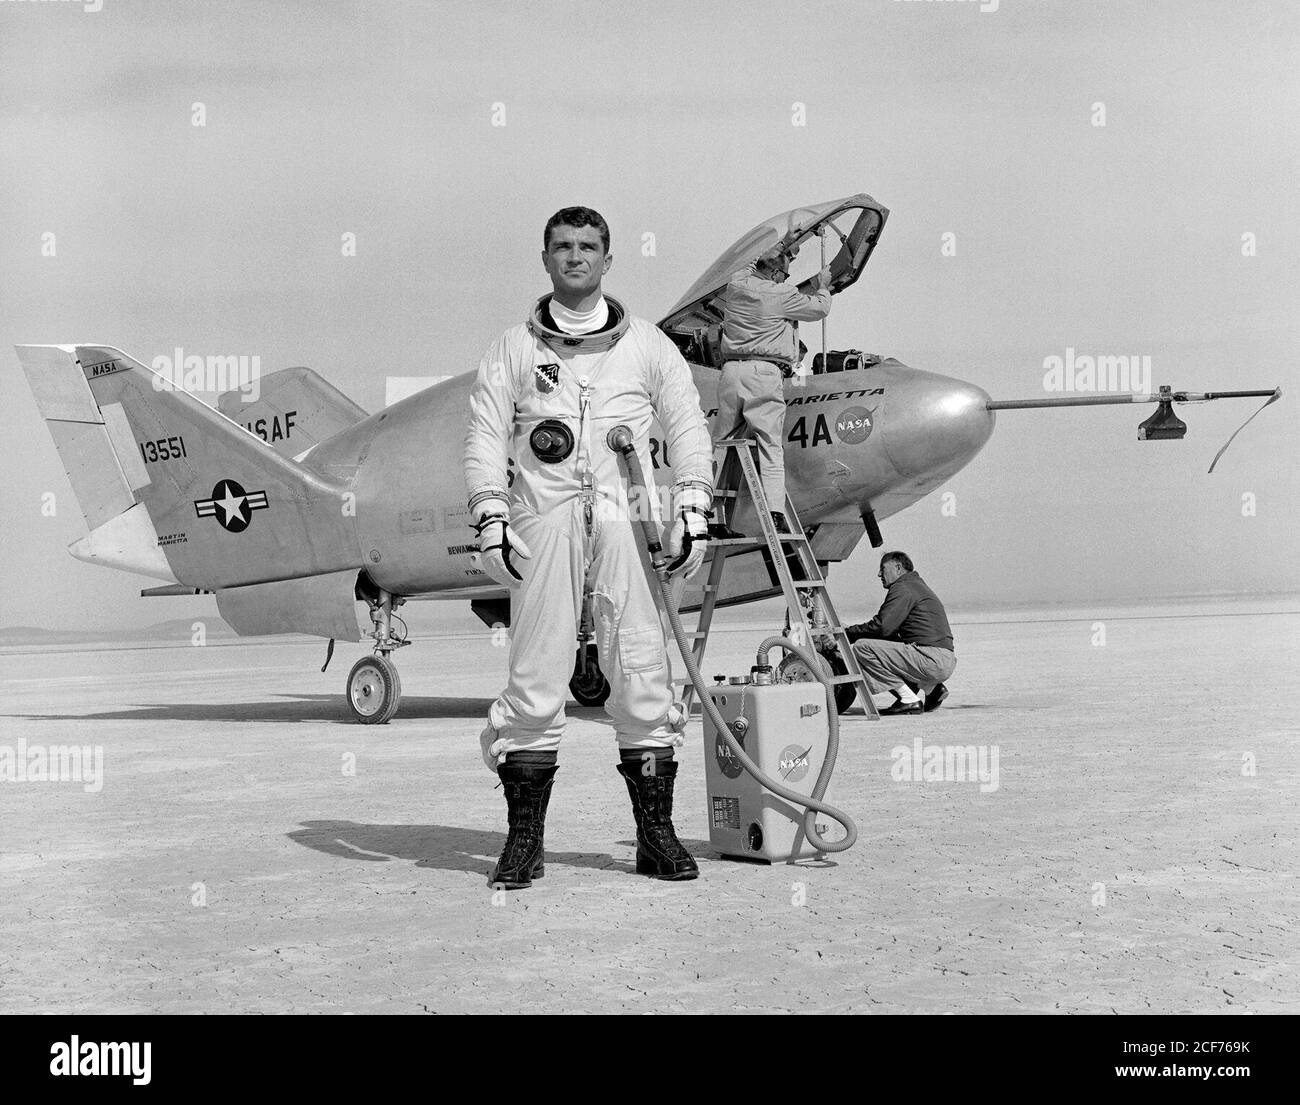 Air Force pilot Major Cecil Powell stands in front of the X-24A after a research flight. Built for the Air Force by Martin Marietta, the X-24A was a bulbous vehicle shaped like a tear drop, with three vertical fins at the rear for directional control. It weighed 6,270 pounds, was just over 24 feet long, and had a width of nearly 14 feet. The first unpowered glide flight of the X-24A was on April 17, 1969. The pilot was Air Force Major Jerauld Gentry. Gentry also piloted the vehicle on its first powered flight March 19, 1970. It was flown 28 times in a program which, like the HL-10, helped vali Stock Photo